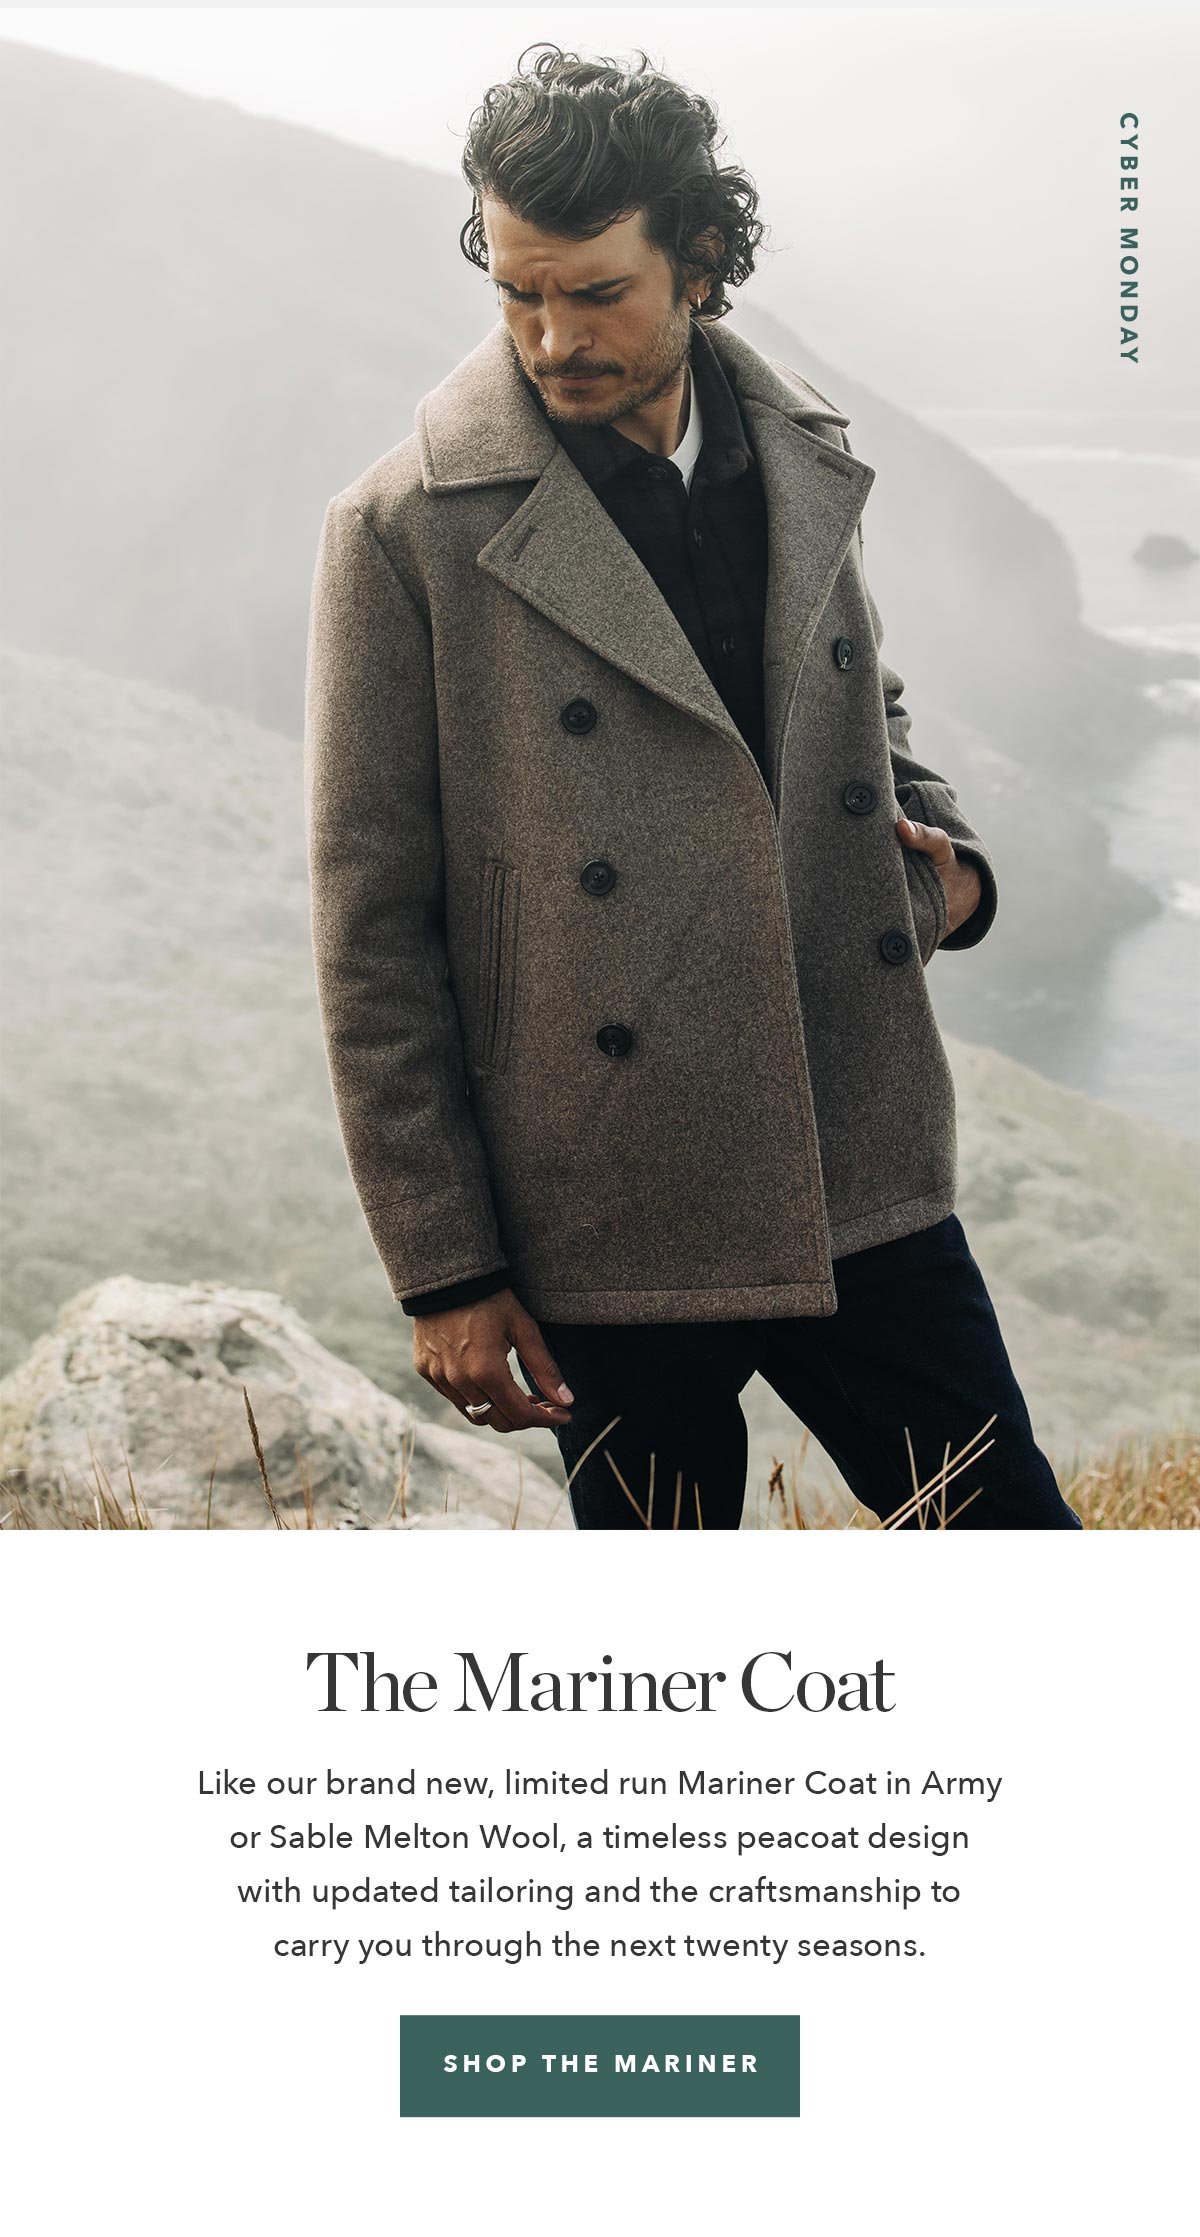 Like our brand new, limited run Mariner Coat in Army or Sable Melton Wool, a timeless peacoat design with updated tailoring and the craftsmanship to carry you through the next twenty seasons.